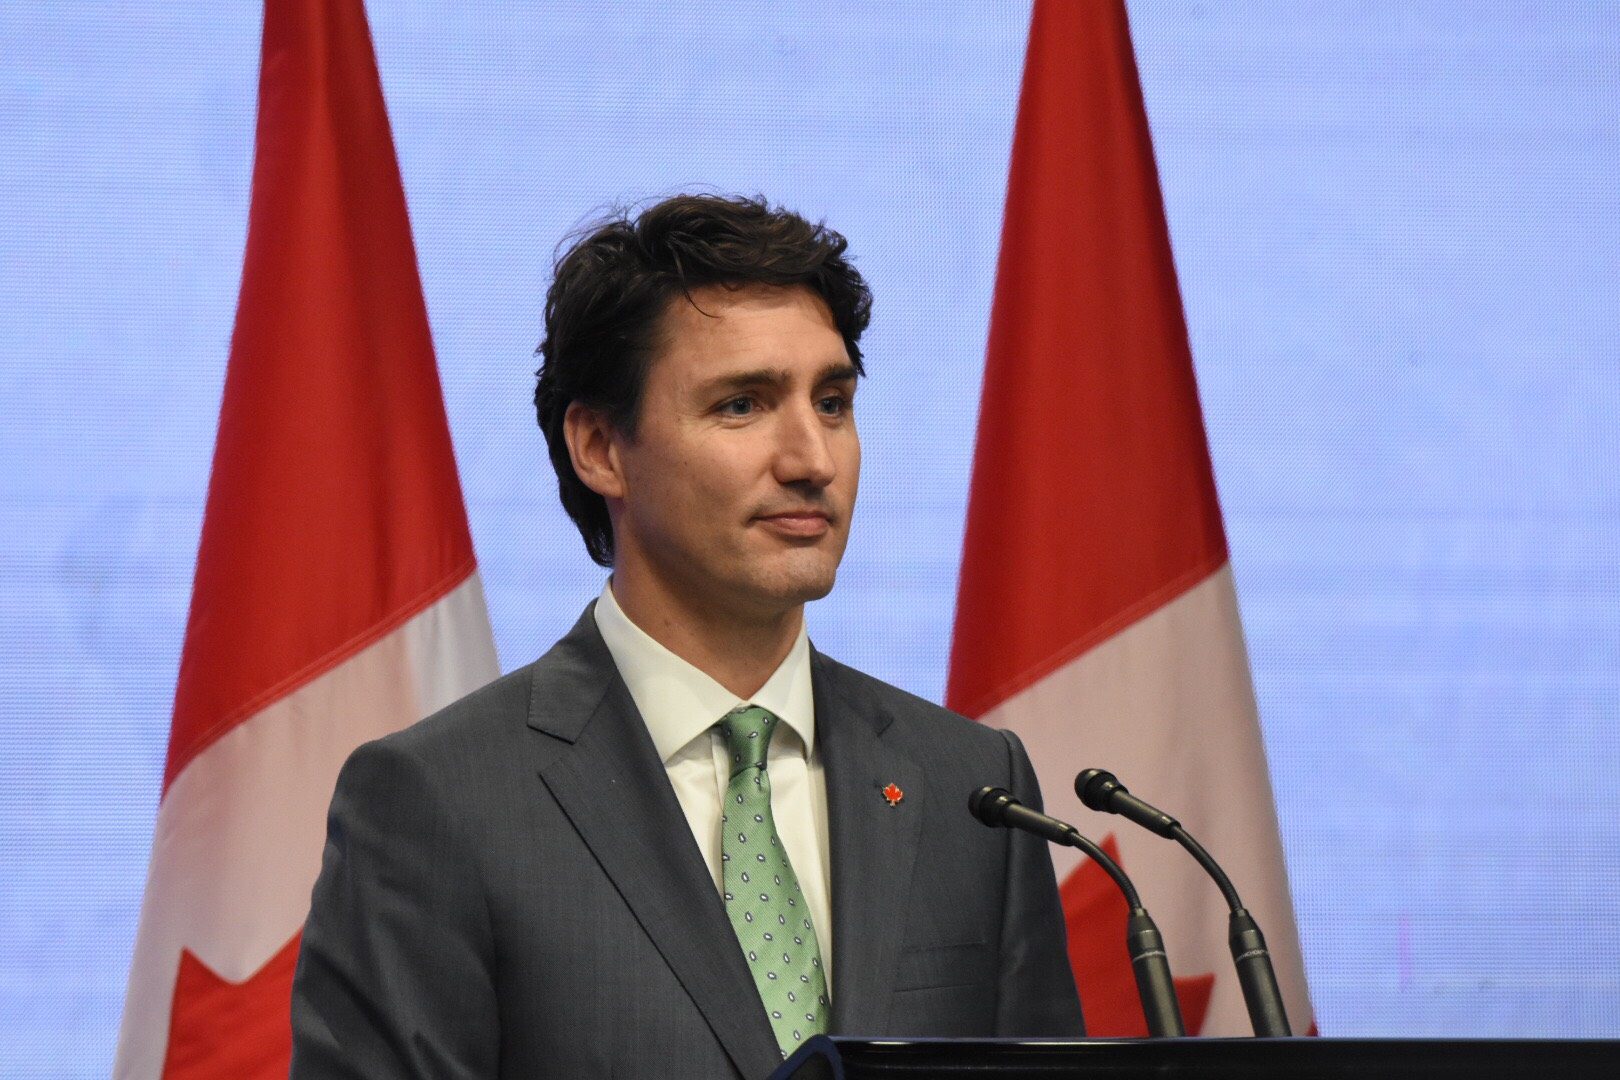 Canada PM does not back down on rights defense in Saudi spat